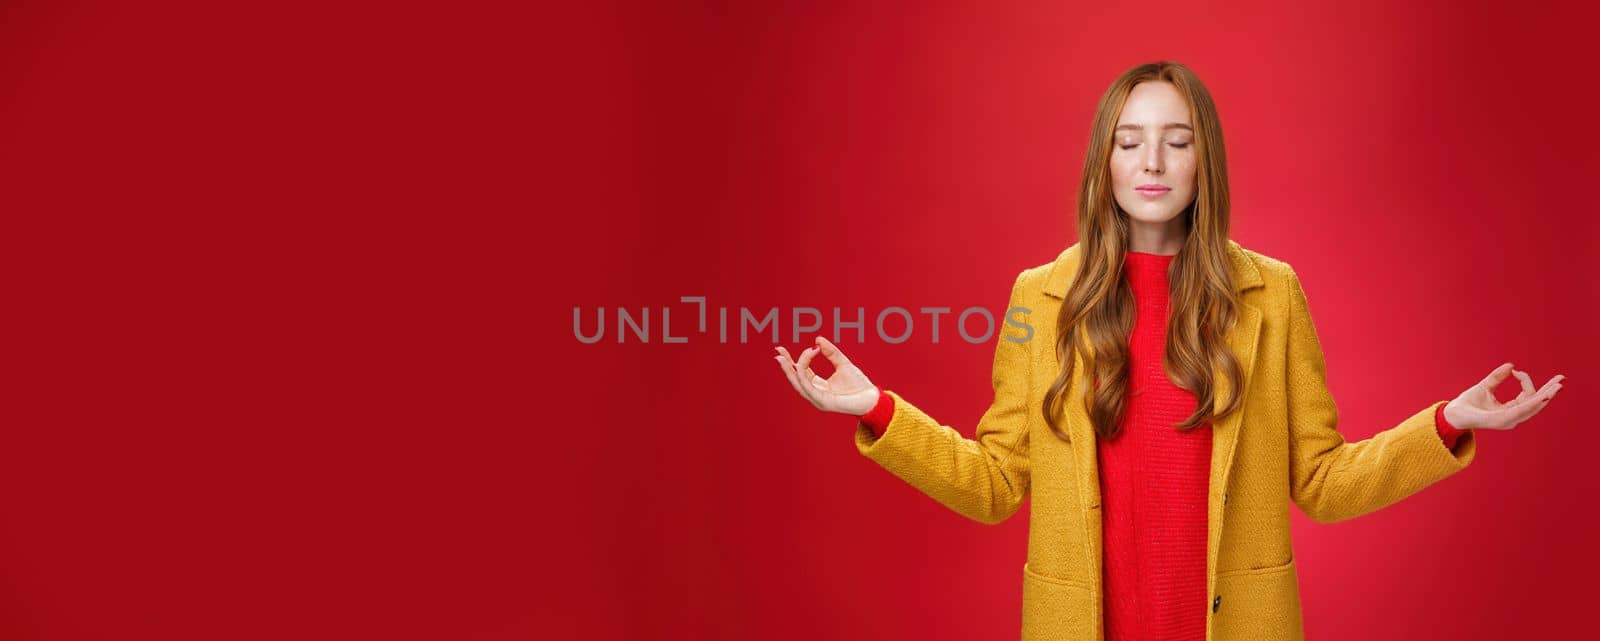 Girl keep calm releasing stress with meditation, posing in yellow coat, close eyes and looking relieved as extending hands sideways with mudra gesture, doing yoga against red background in lotus pose by Benzoix